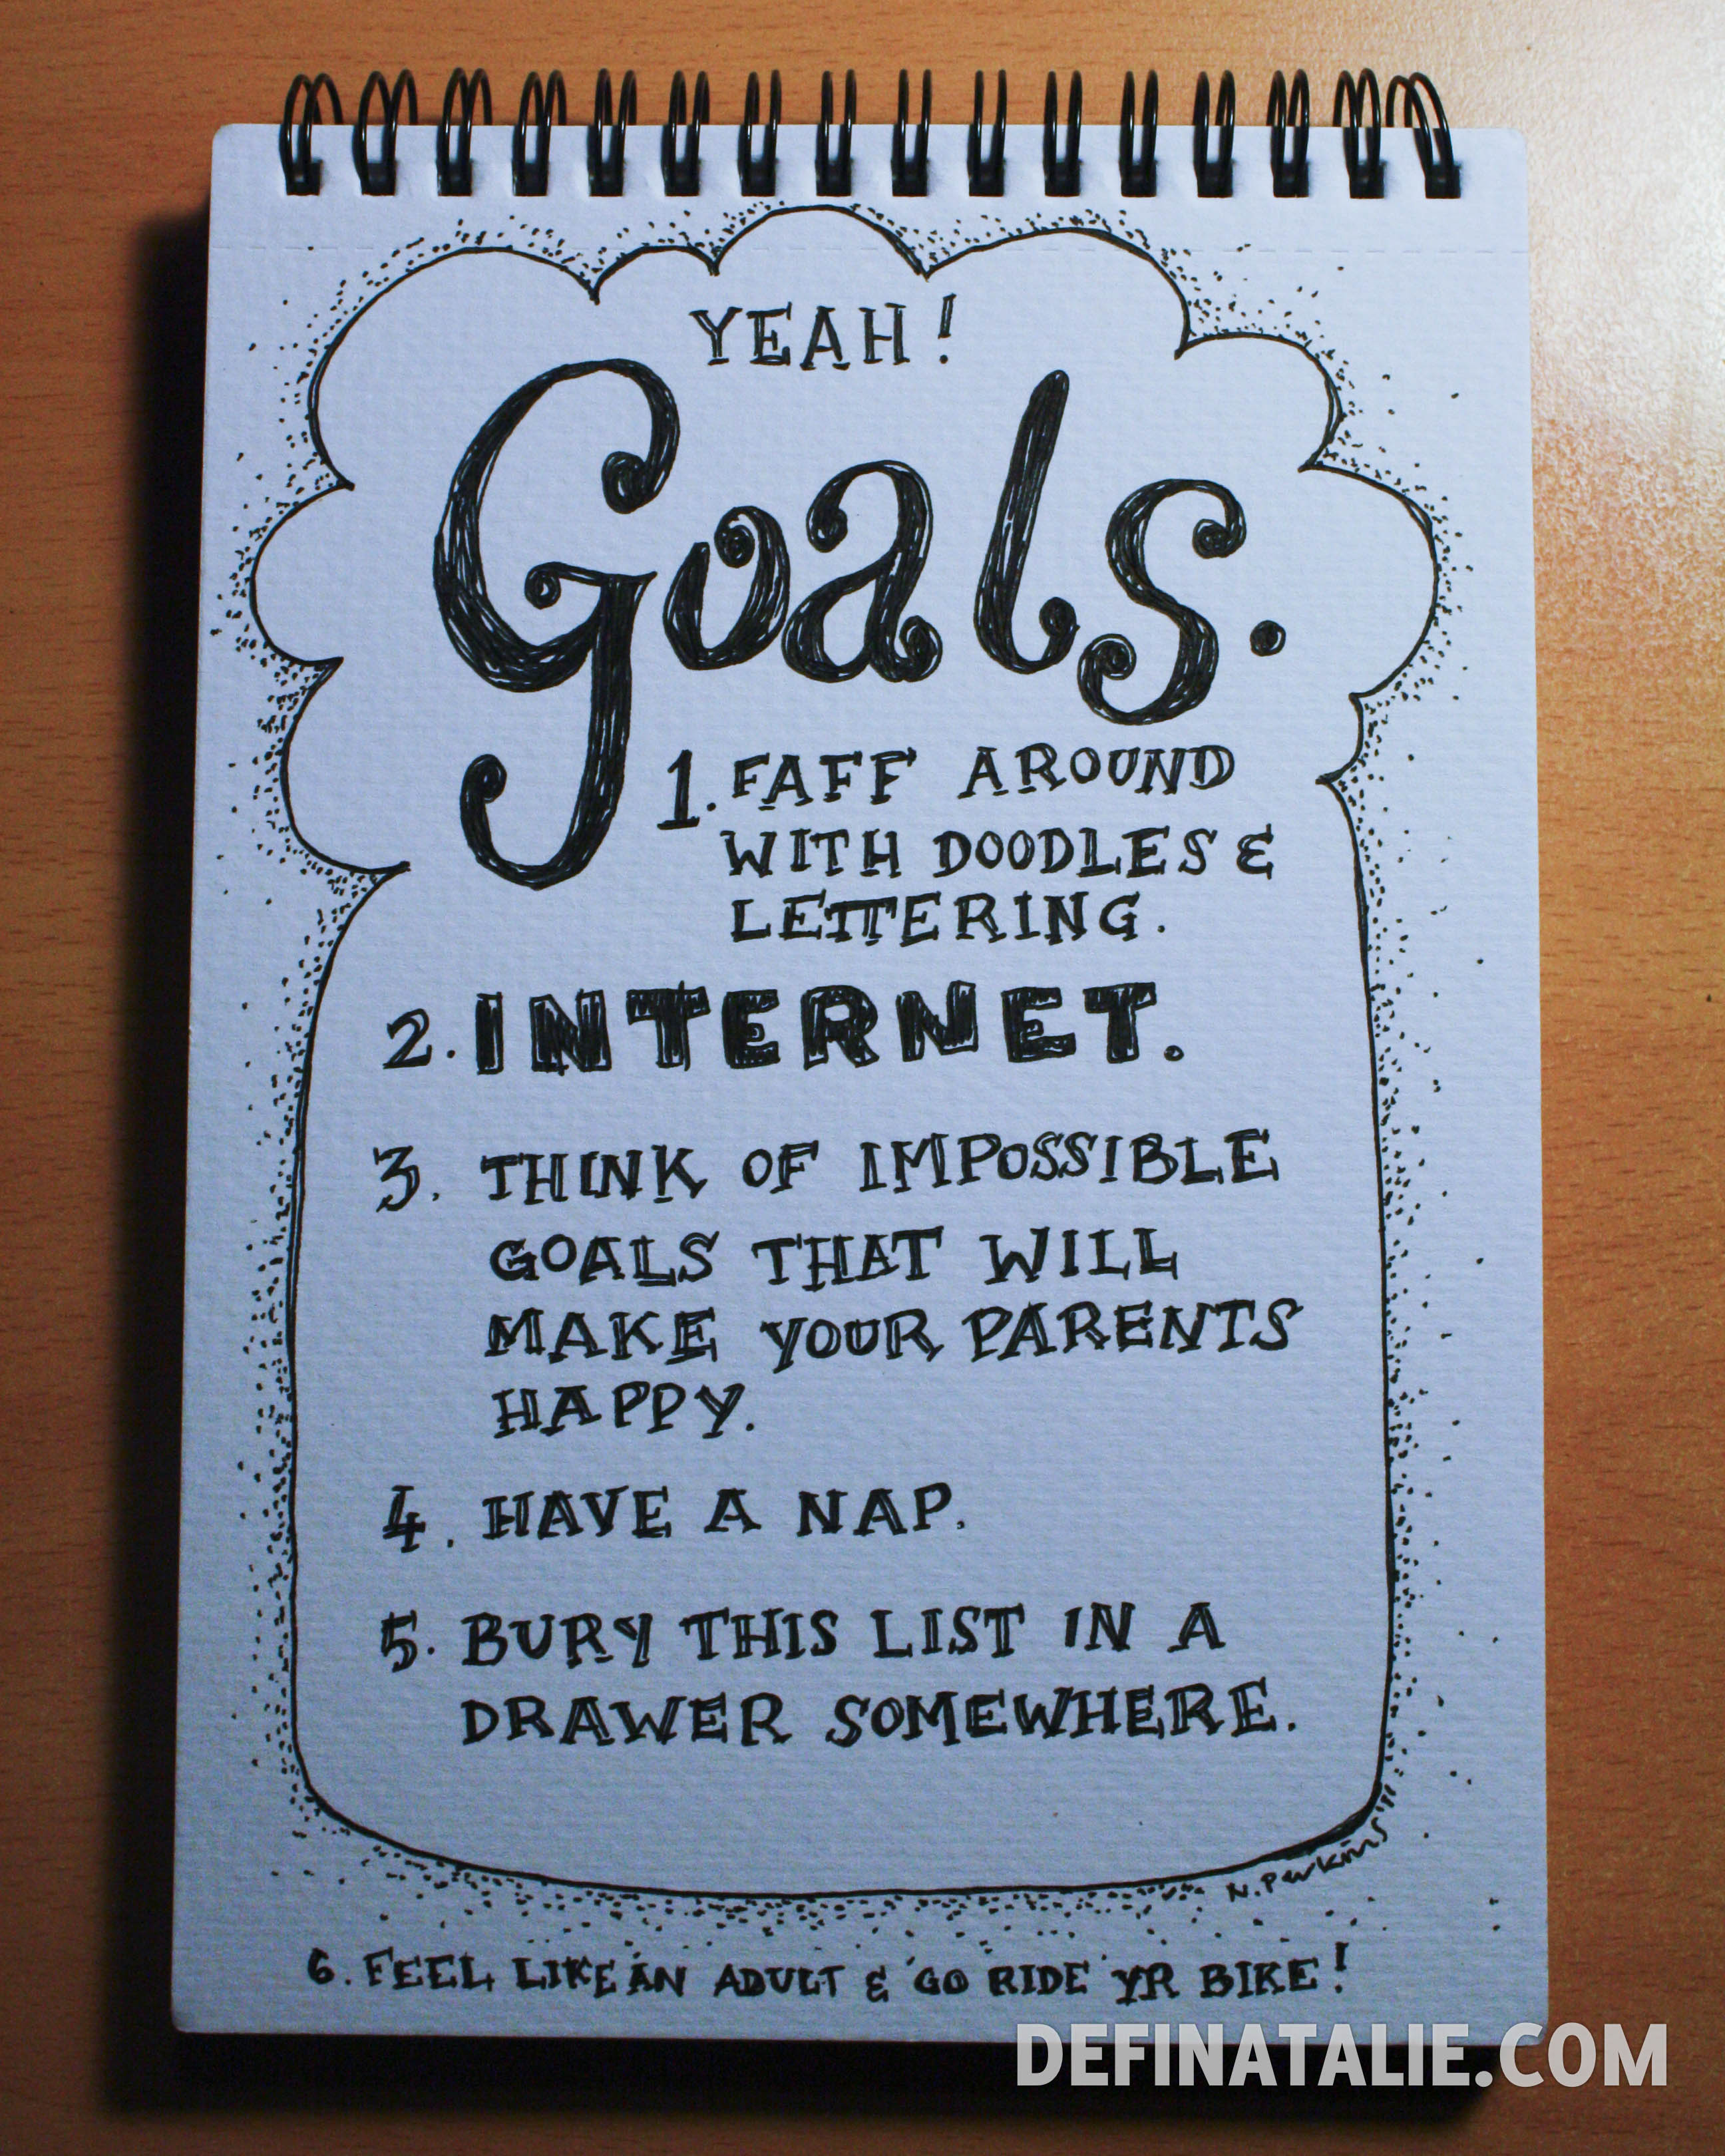 30 by 2012: Stuff I want to do.